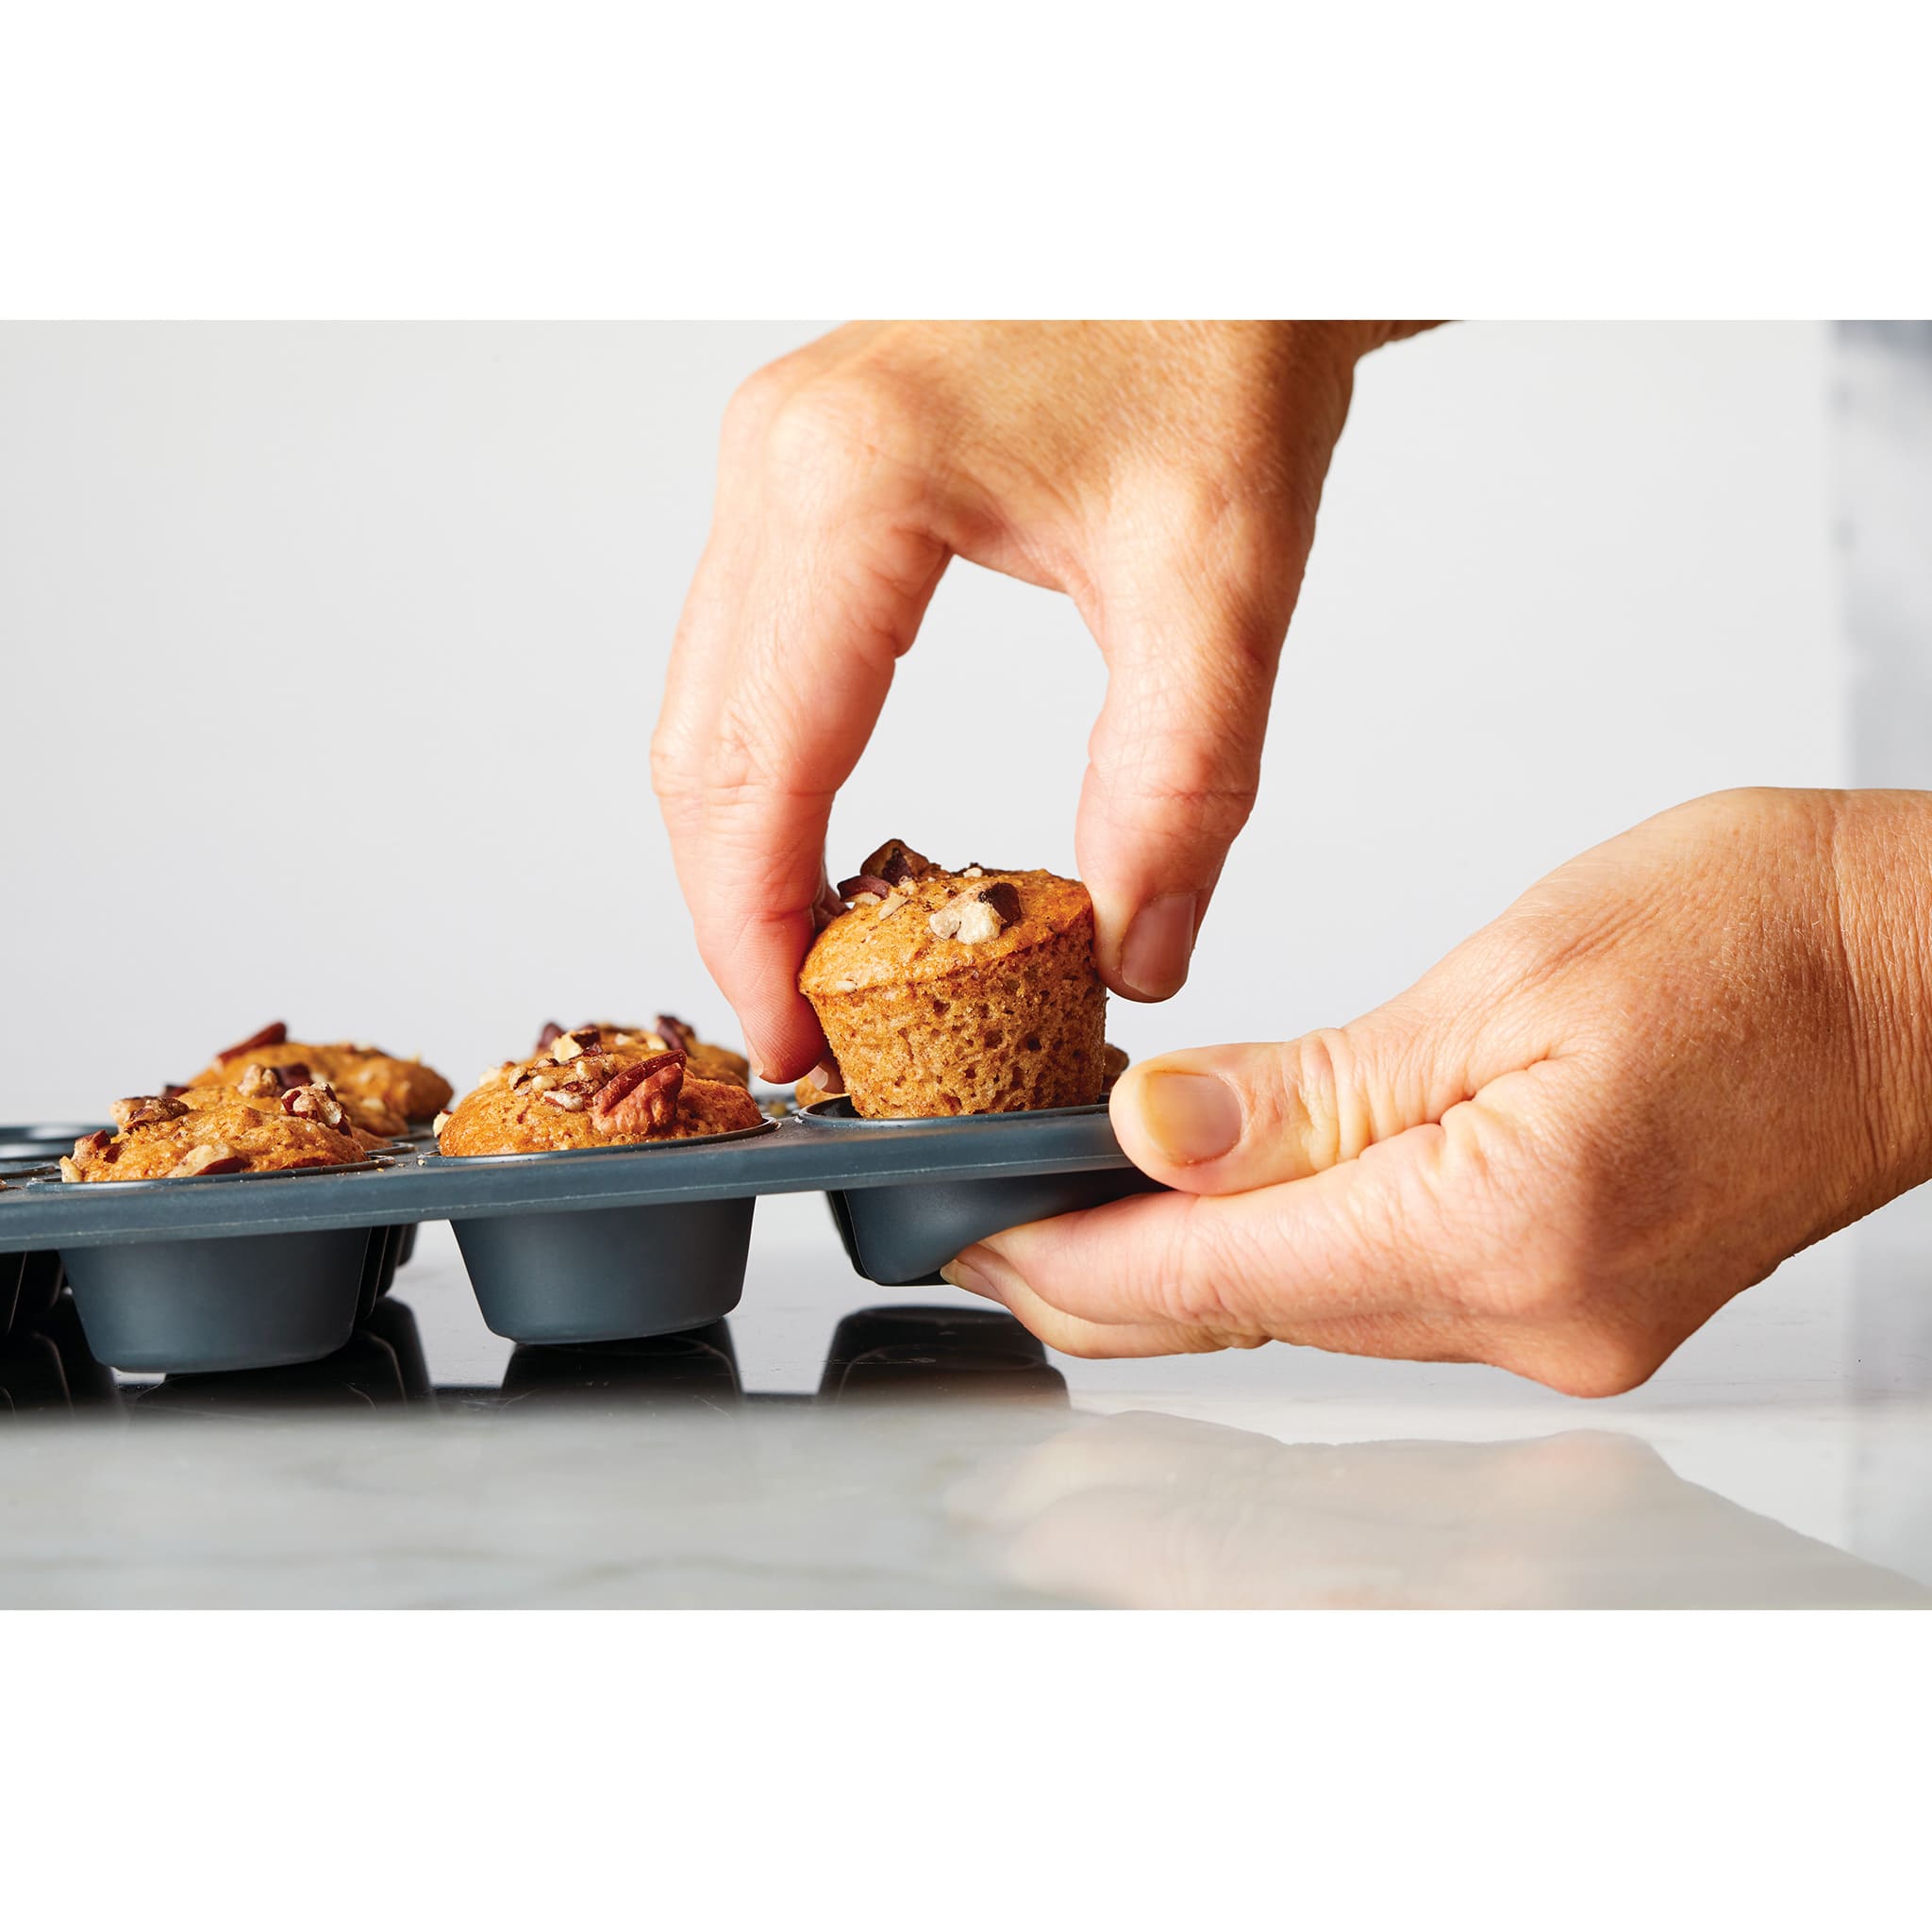 Daily Bake Premium Food Safe Silicone 24 Cup Mini Muffin Pan Steel  Reinforced